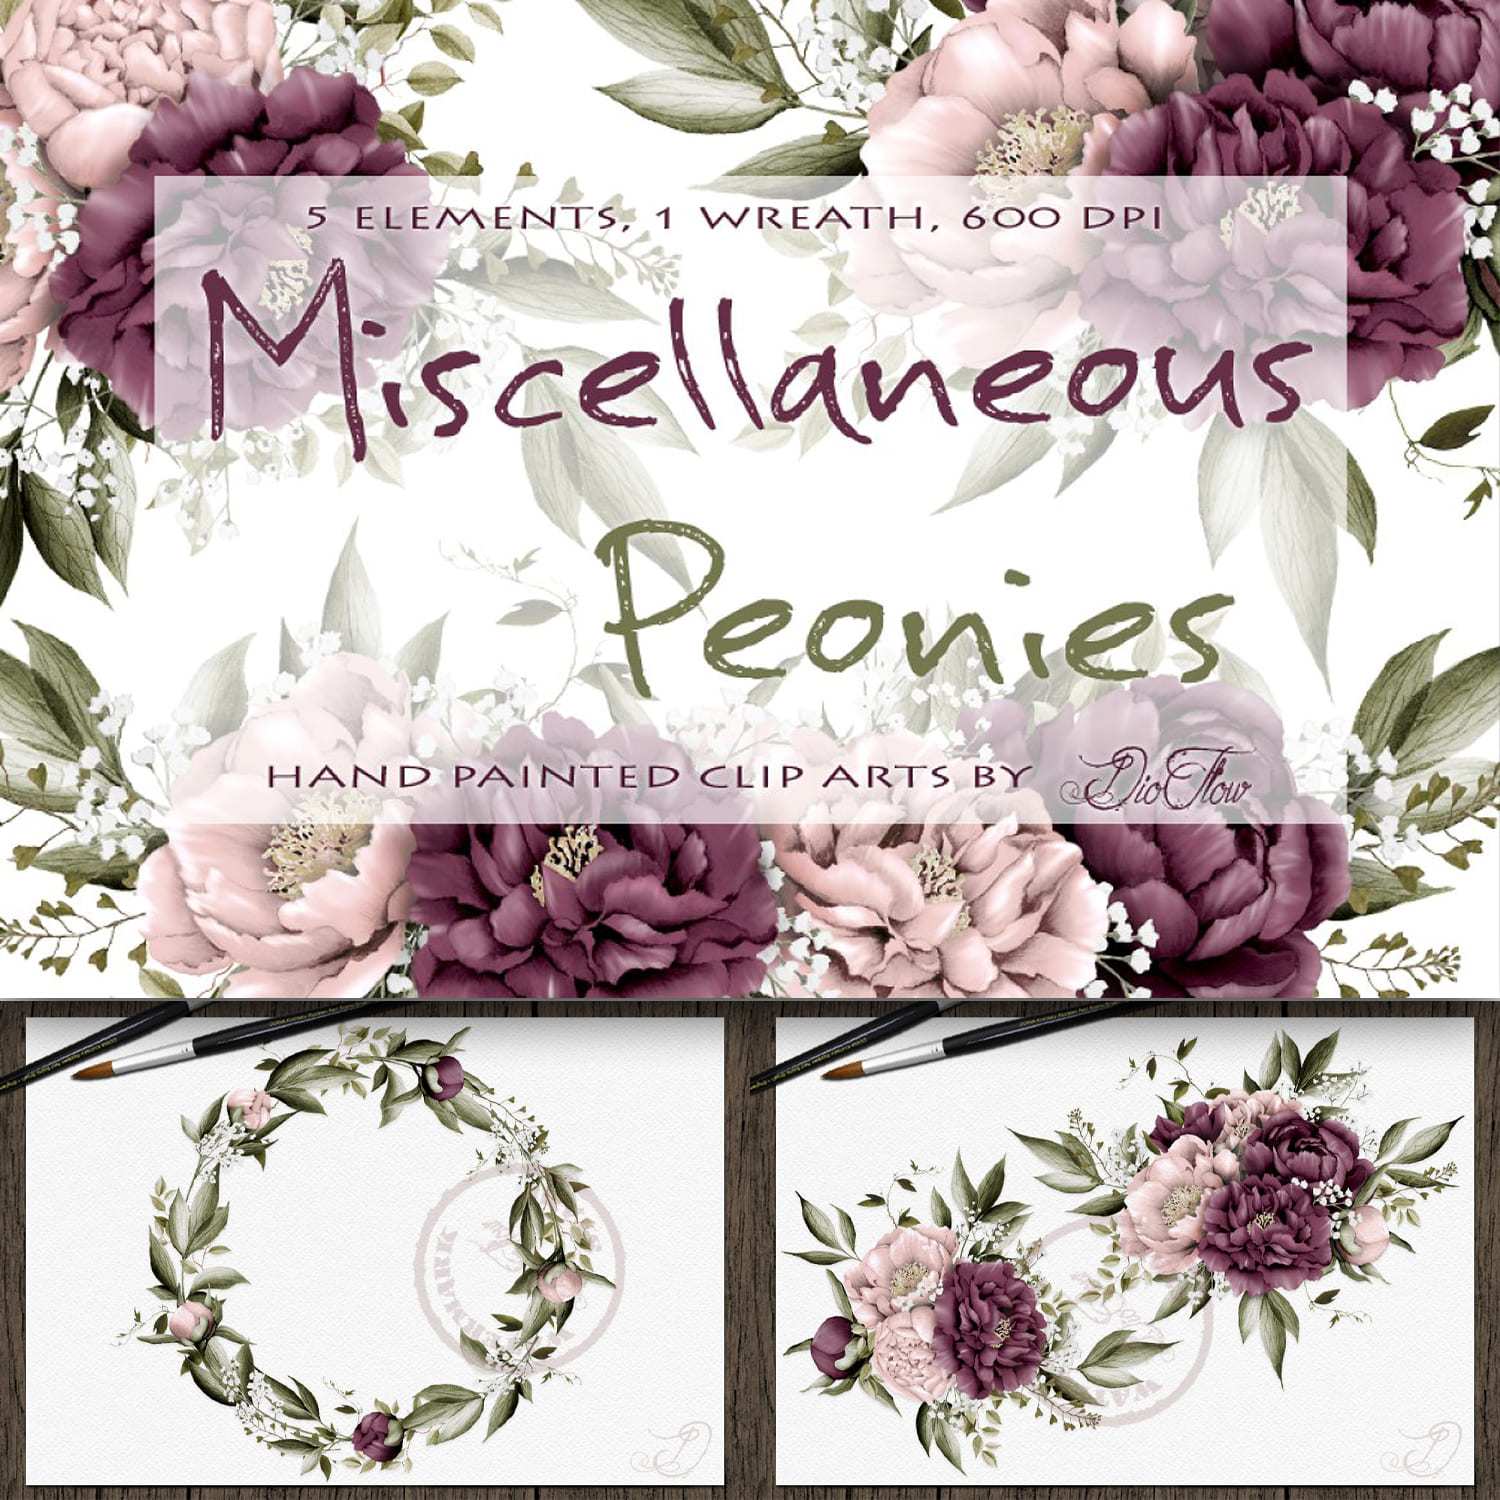 Burgundy Peonies Watercolor Clipart cover.